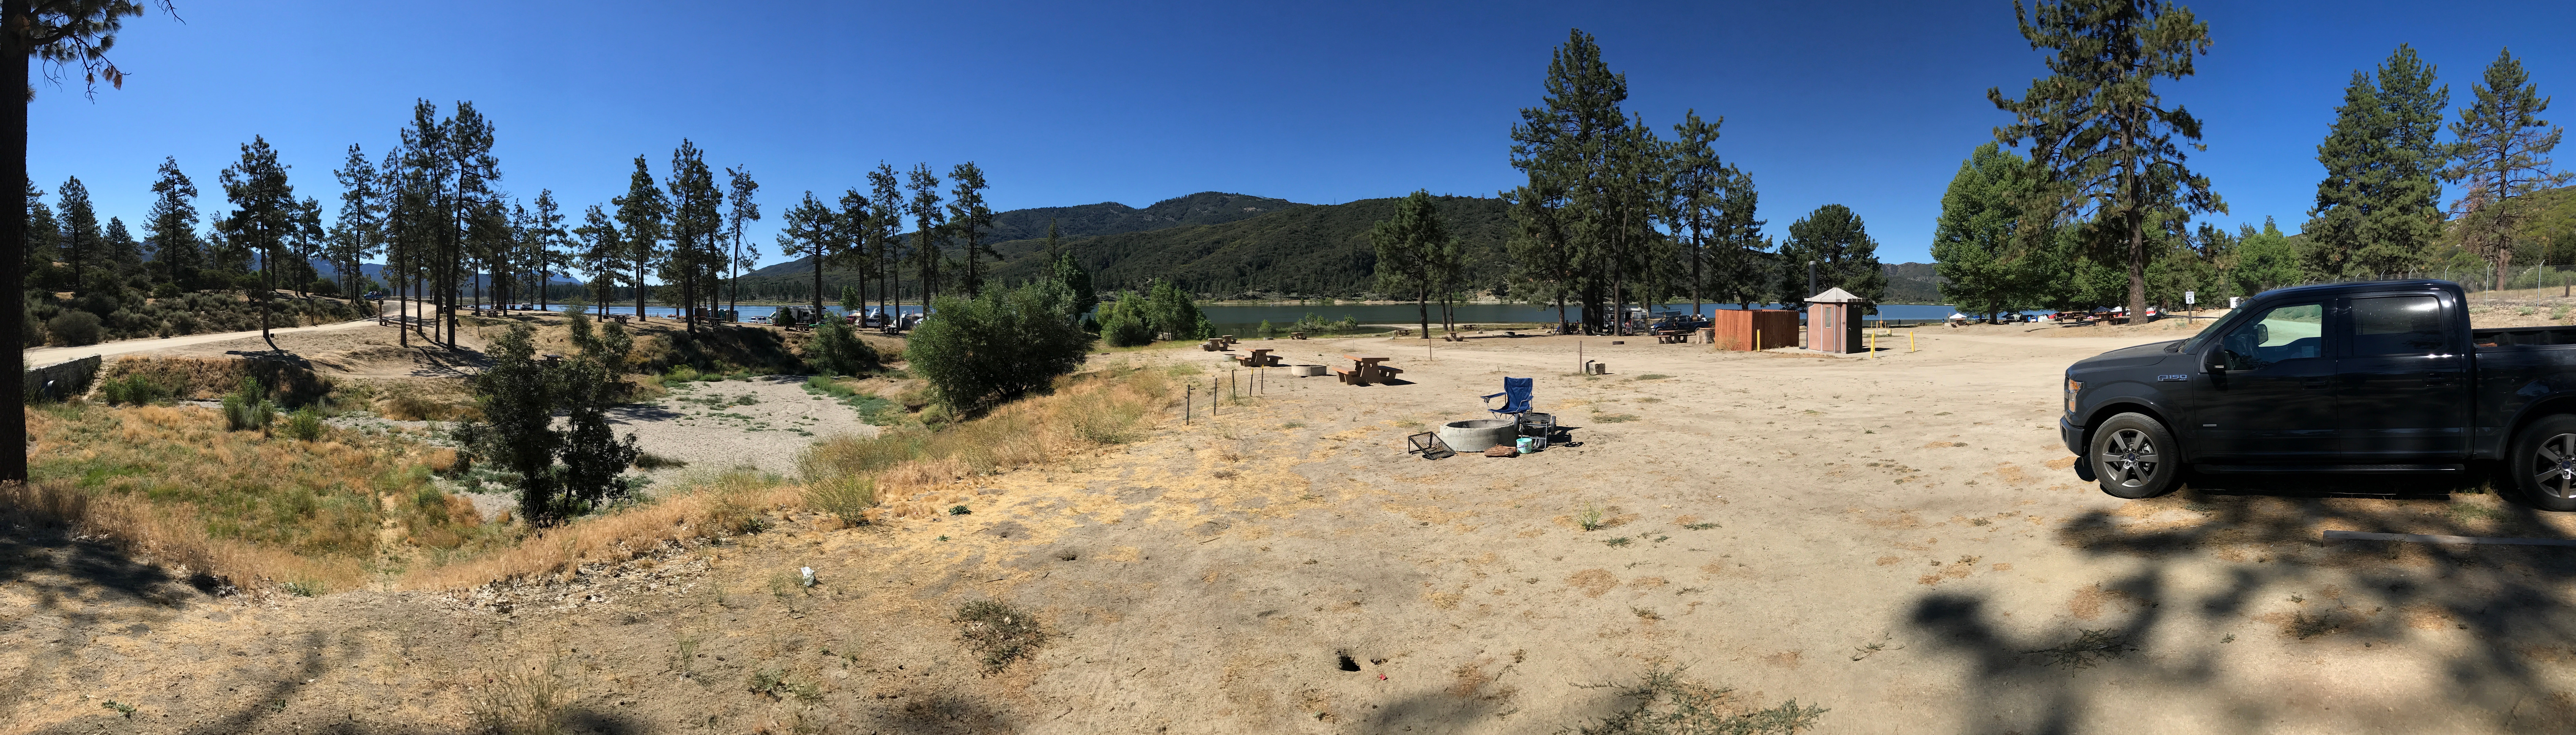 Camper submitted image from Lake Hemet Campground - 5